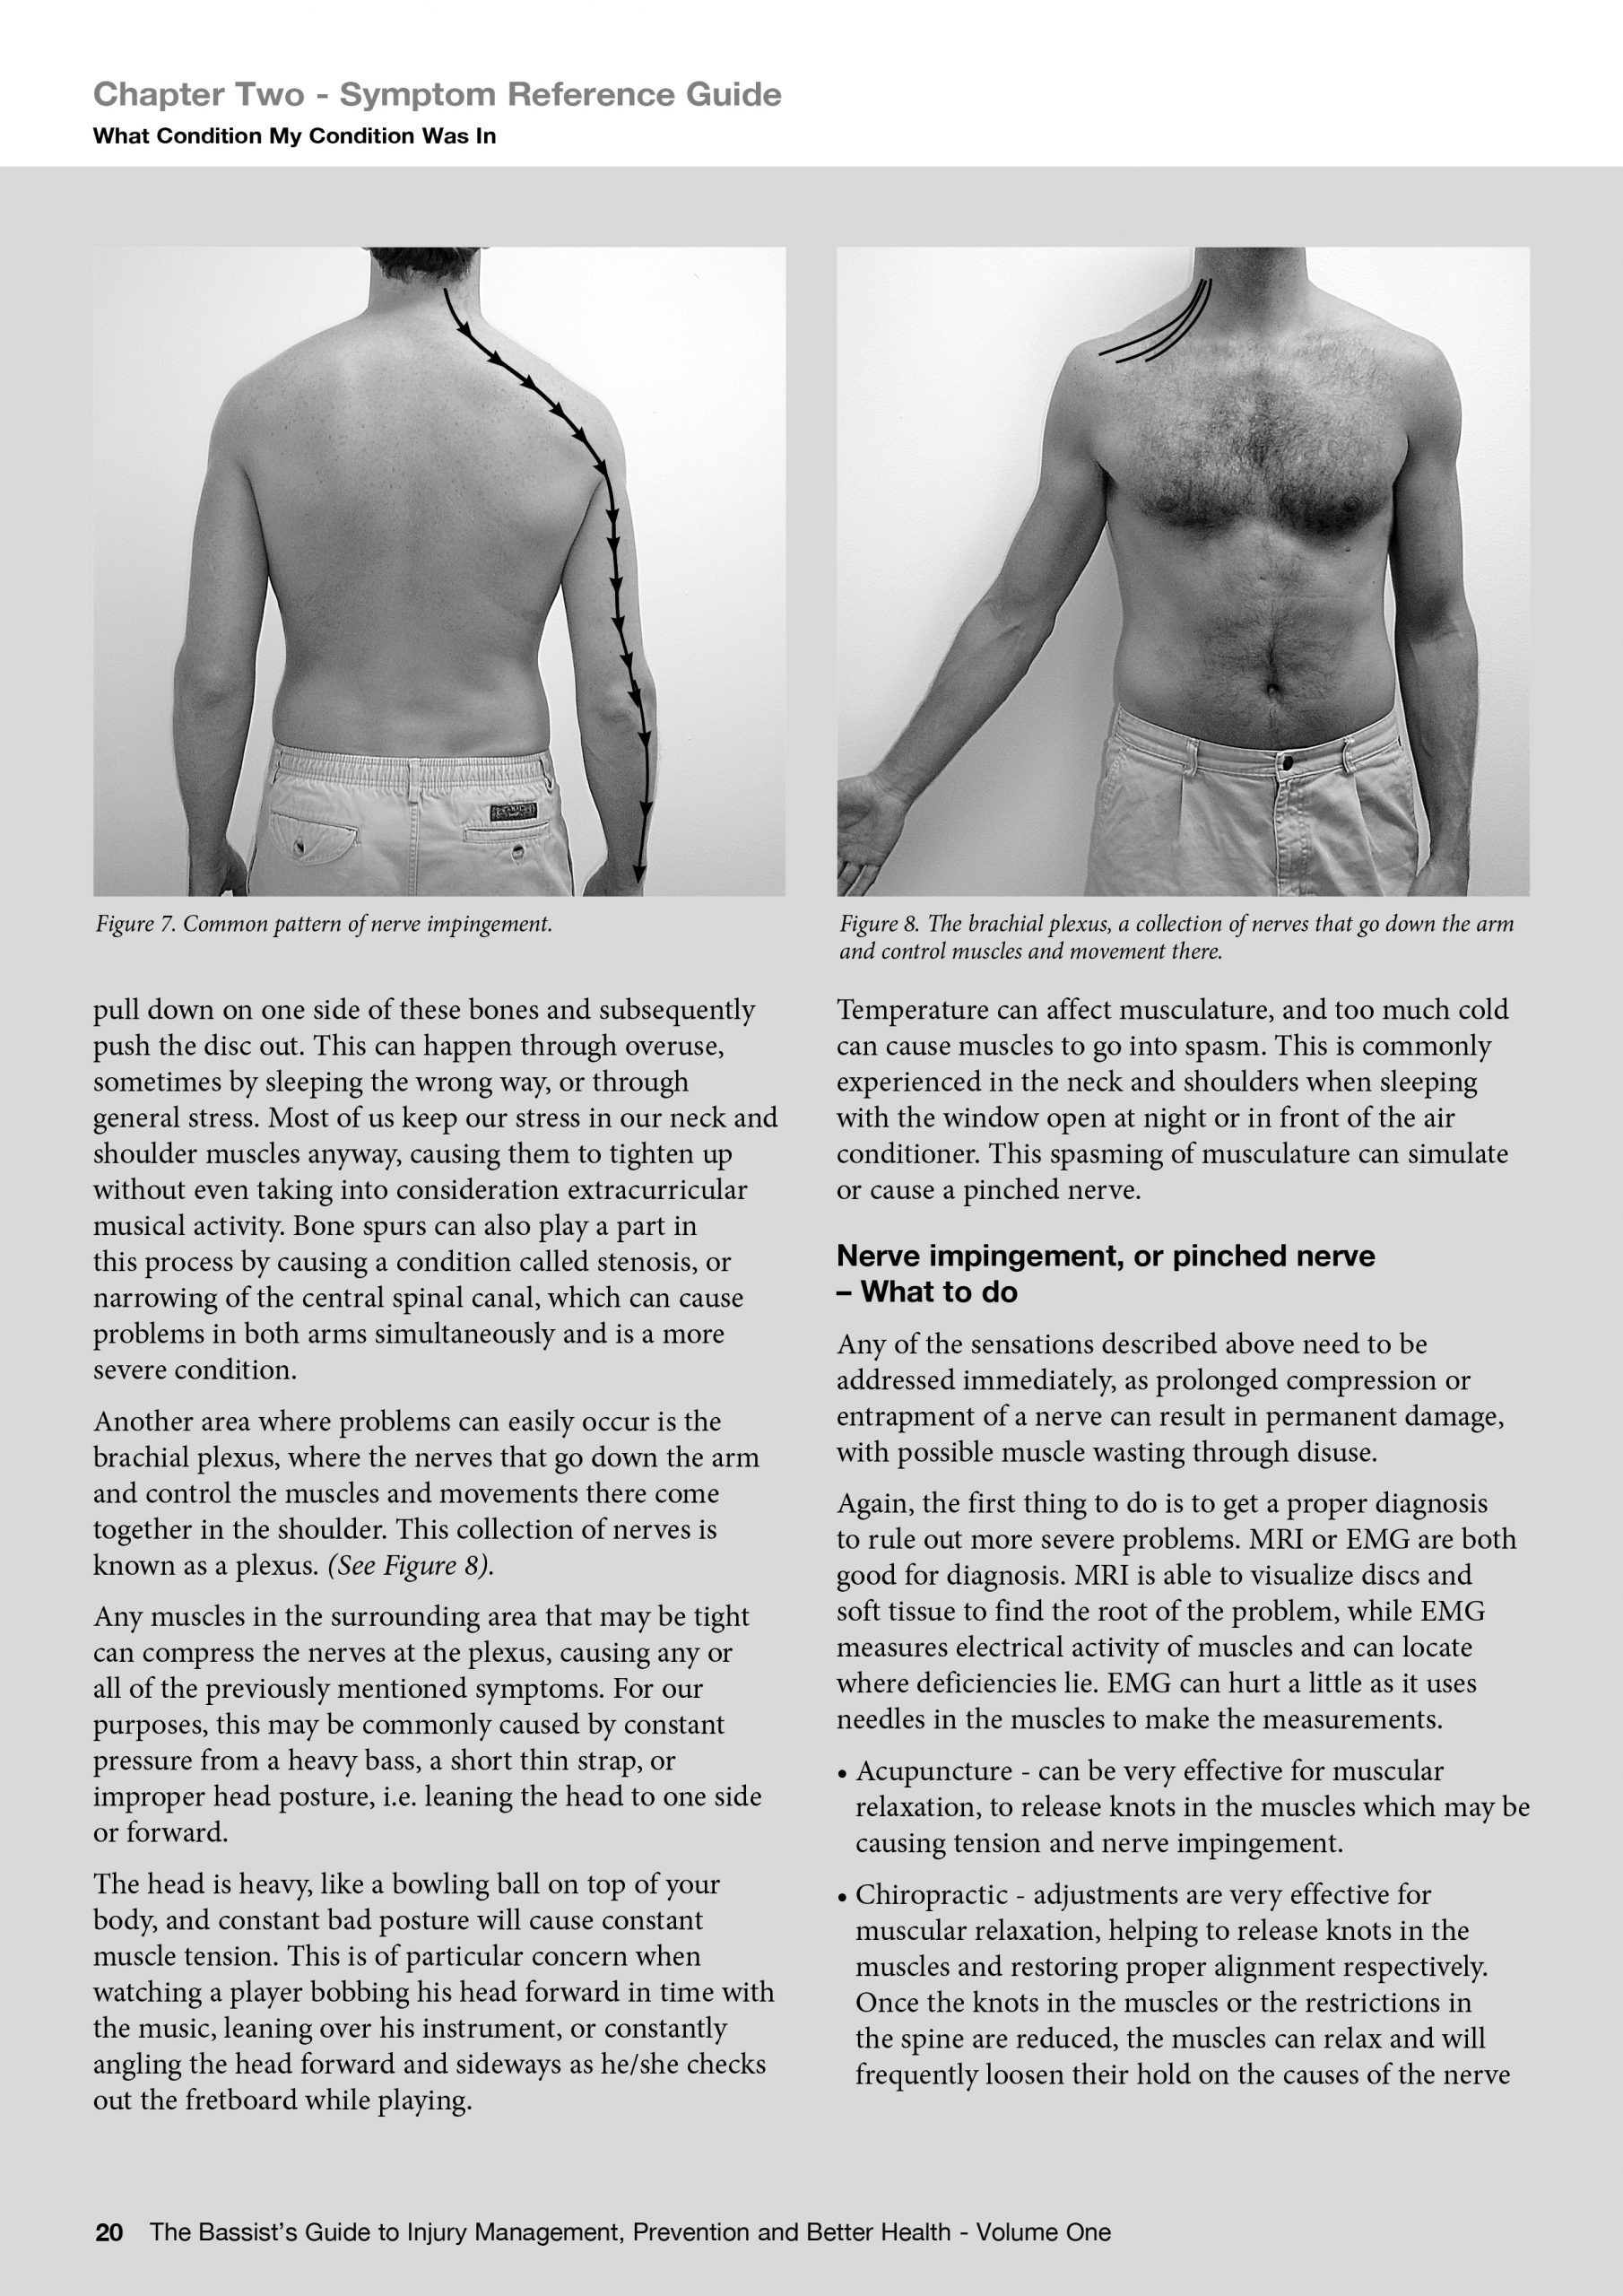 Sample Page from The Bassist’s Guide to Injury Management, Prevention and Better Health - Volume One